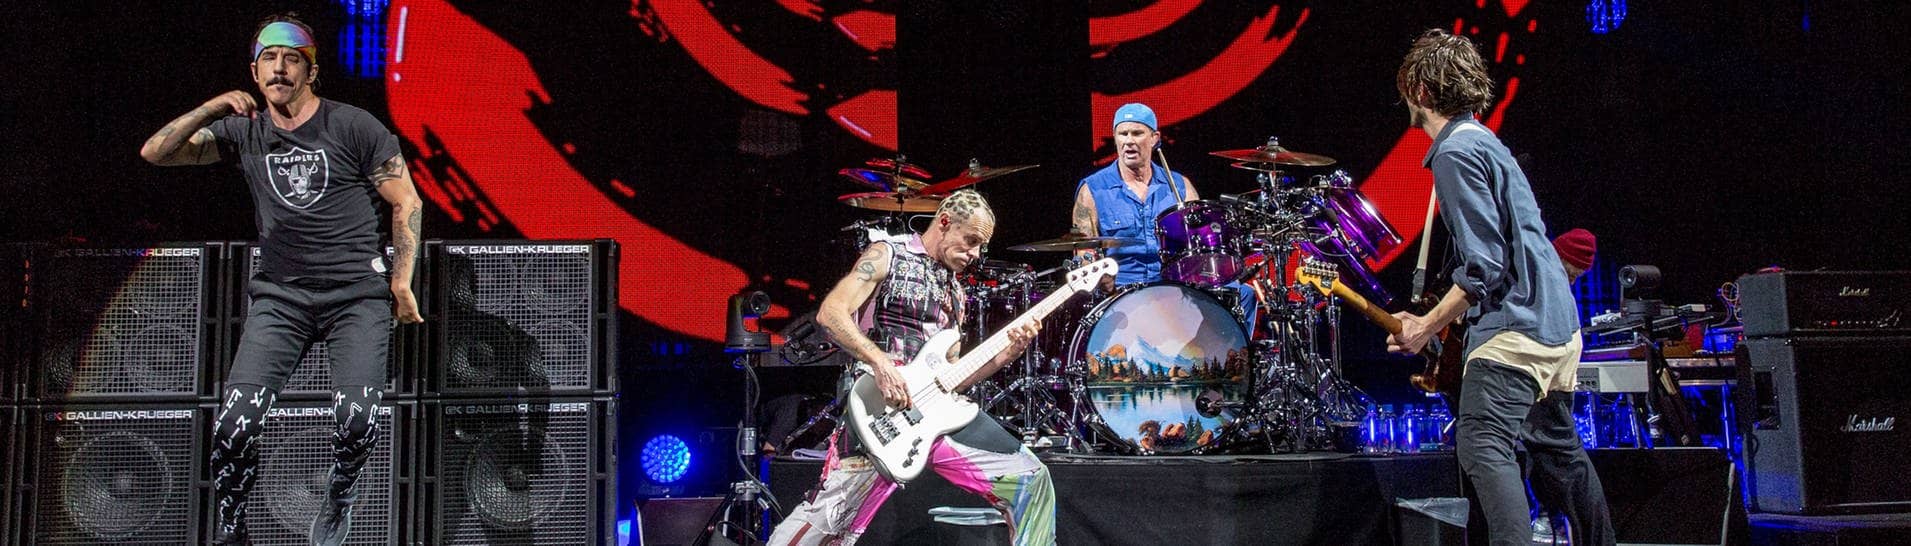 Red Hot Chili Peppers live 2019 Pyramiden Gizeh Ägypten